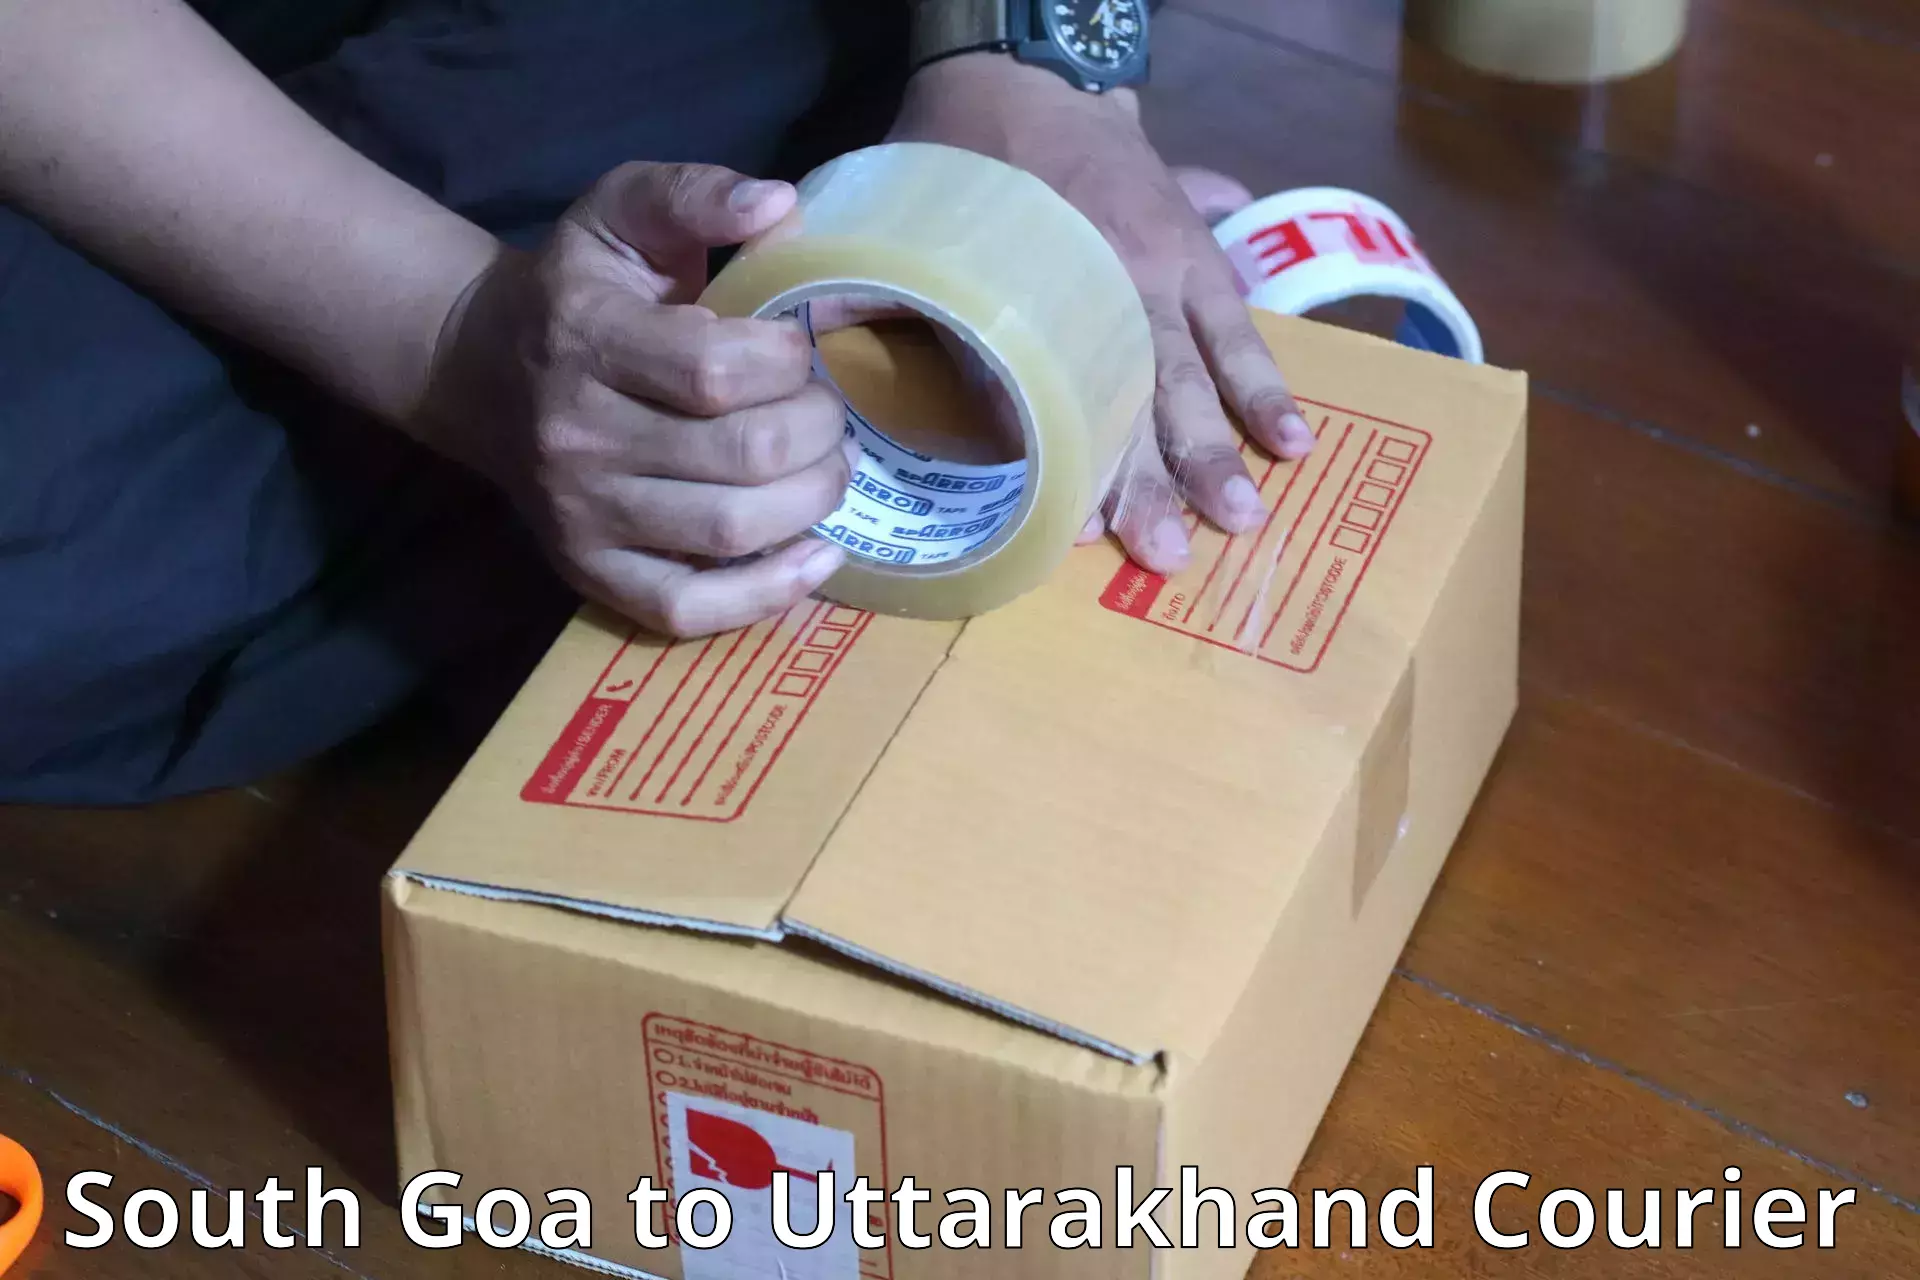 Luggage transport consulting in South Goa to Uttarakhand